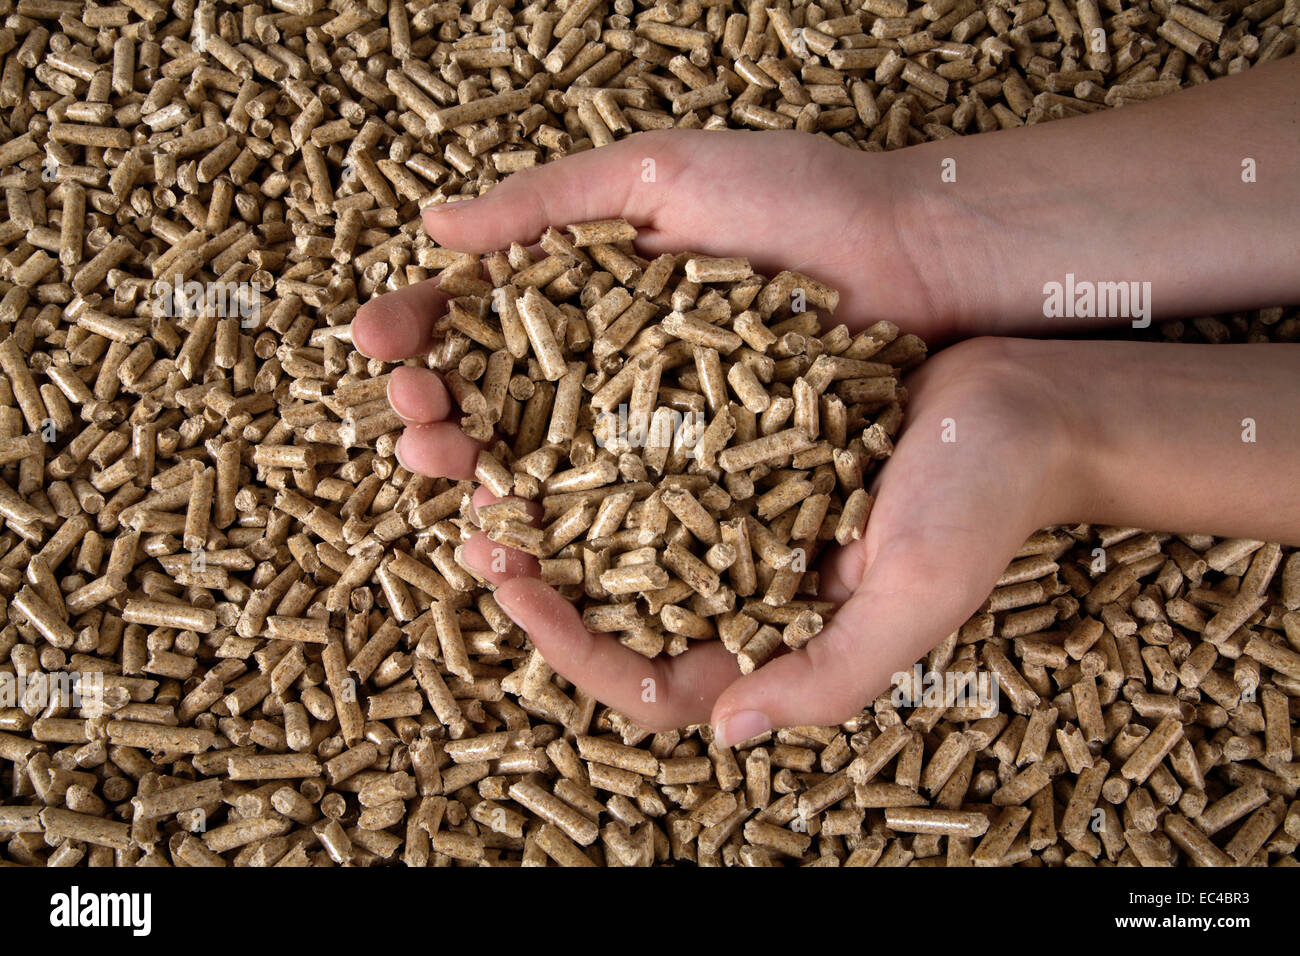 checking the quality of wood pellets Stock Photo